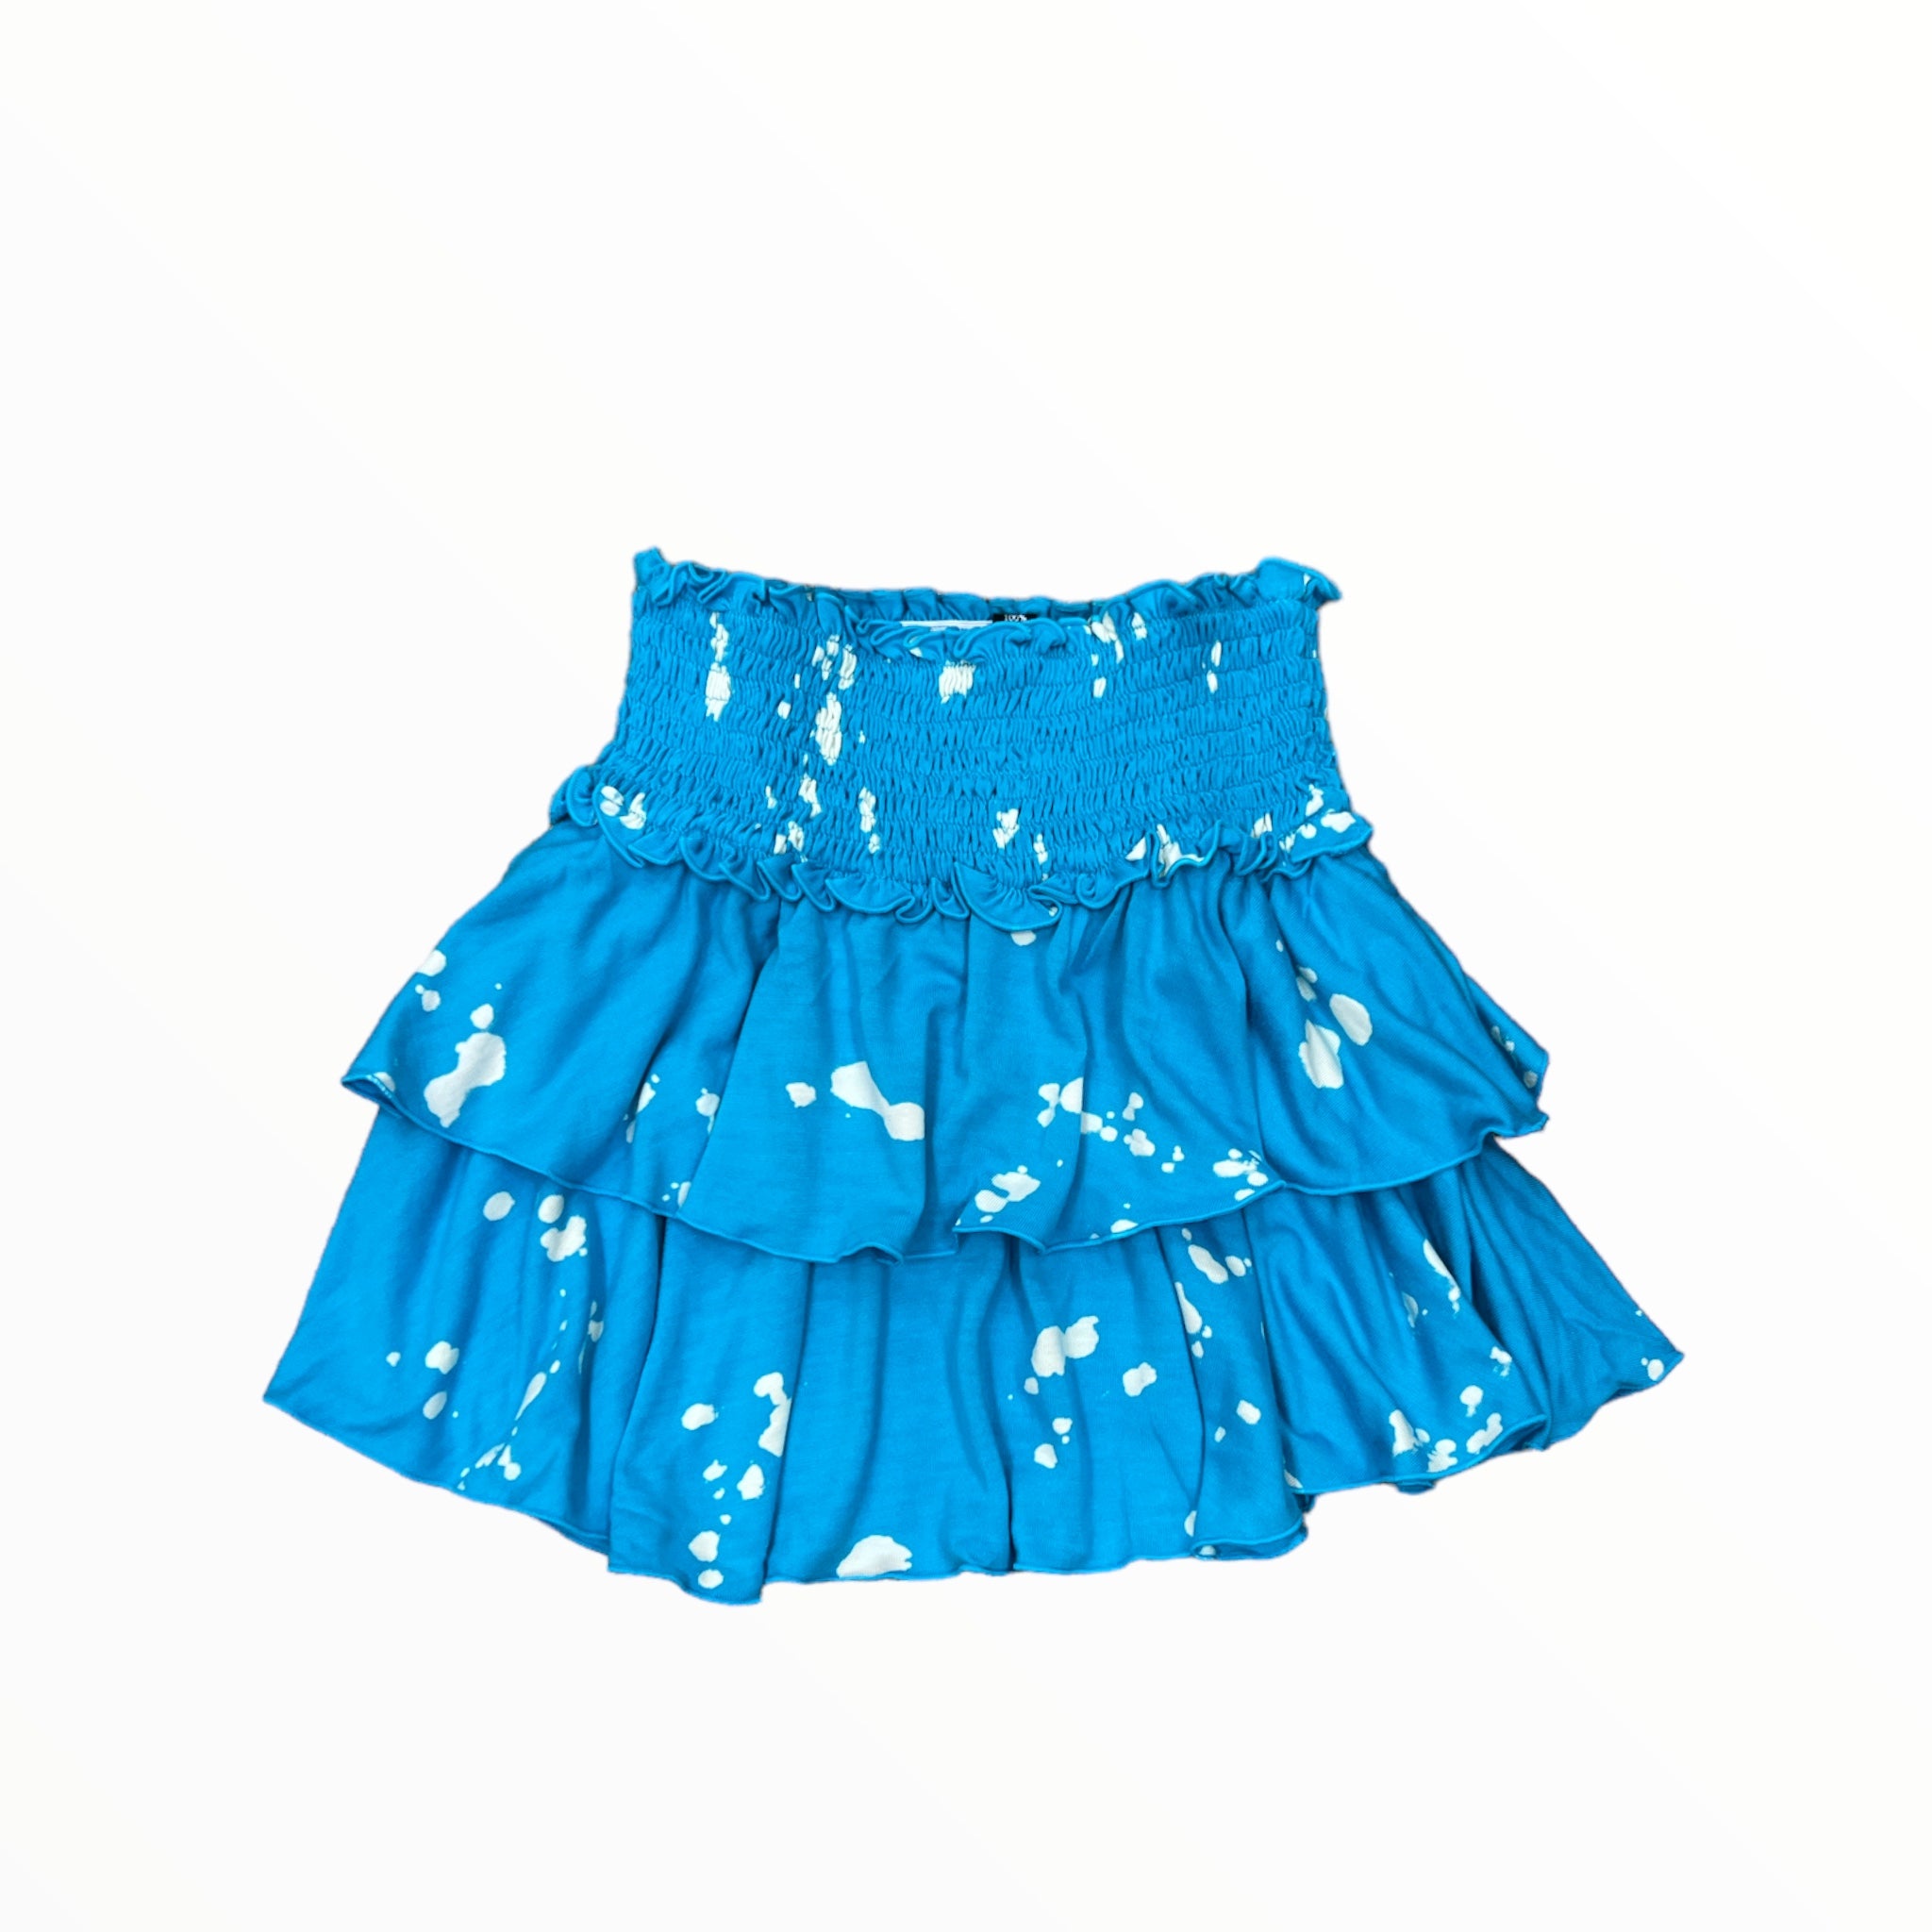 FLOWERS BY ZOE TIERED SKIRT - TURQUOISE/BLEACH